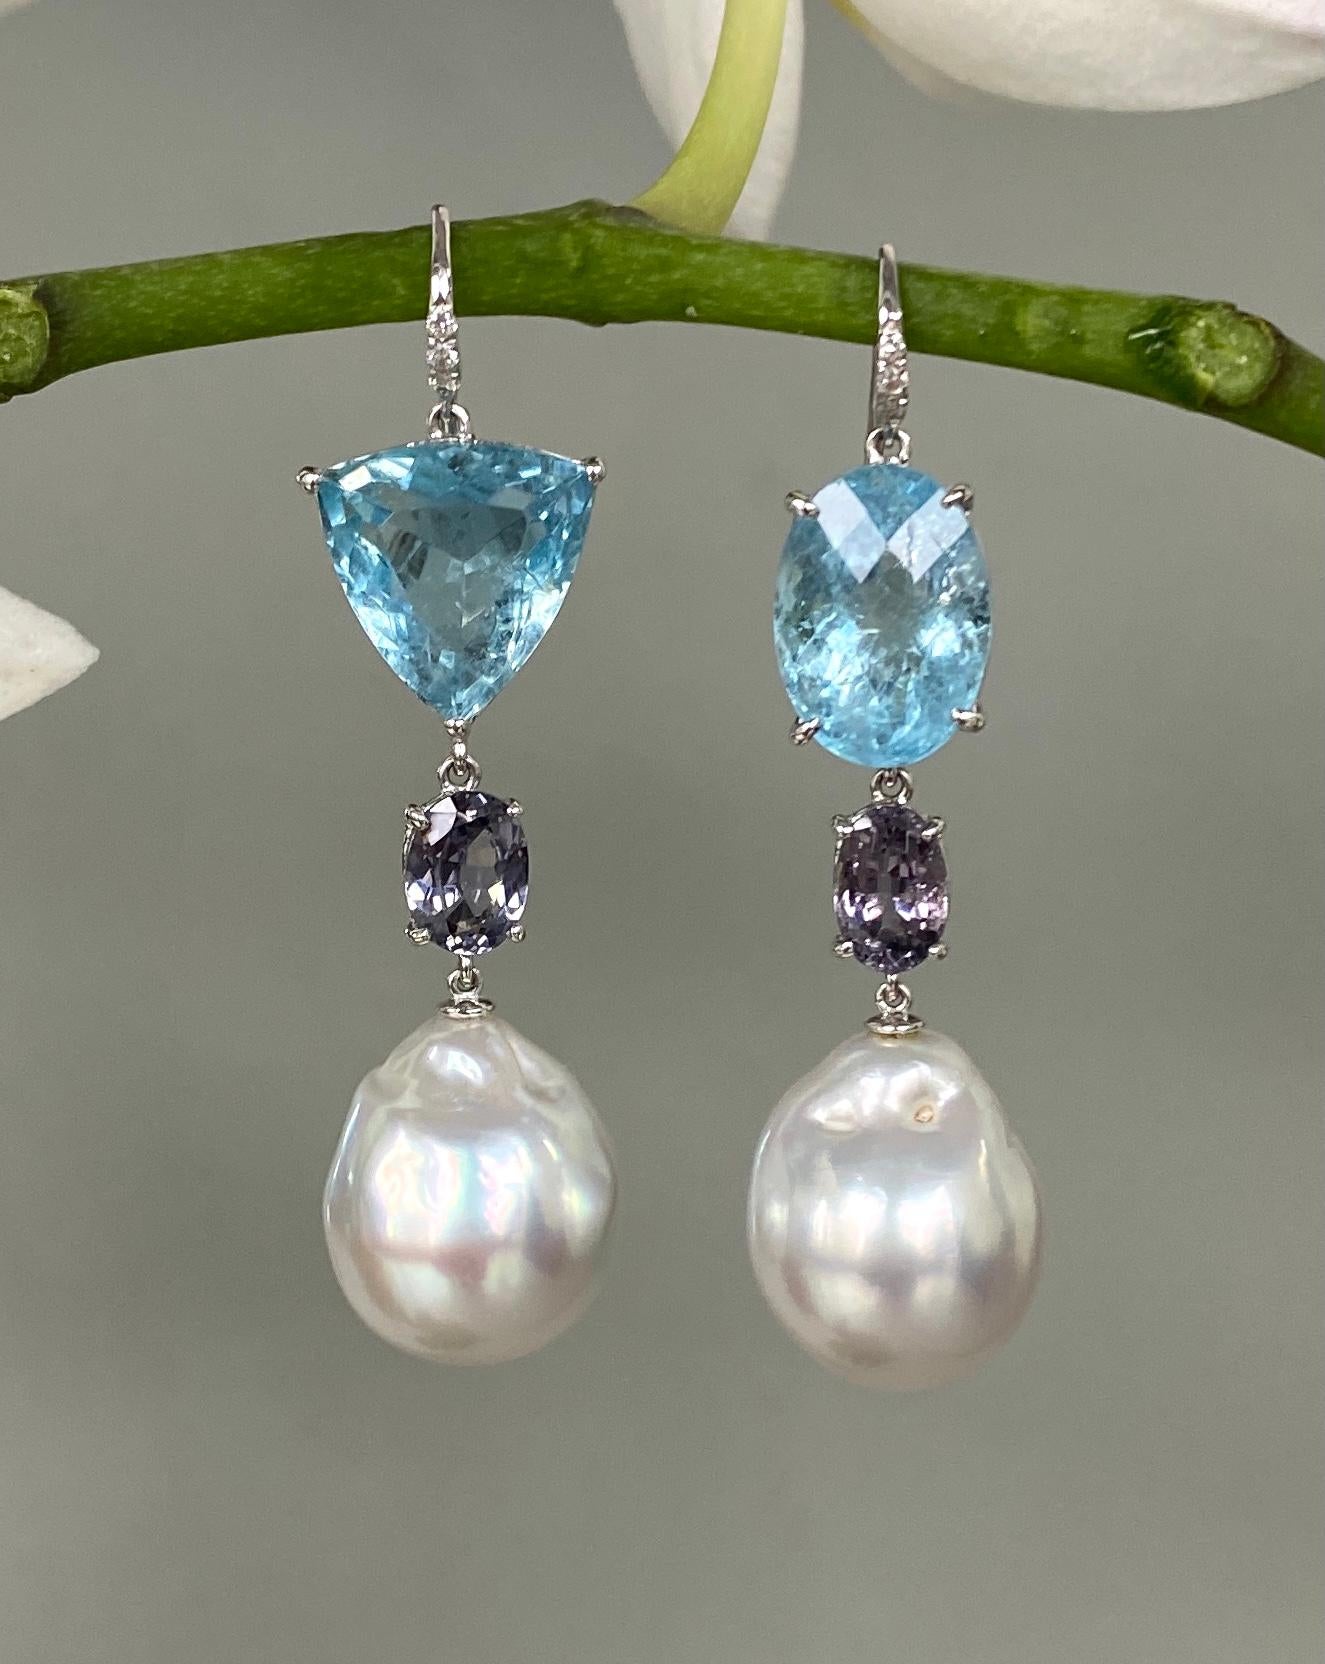 Beautiful one-of-a-kind drop dangle earrings of aquamarines, purple sapphires and white baroque South Sea pearls, handcrafted in 18 karat white gold.

These gorgeous drop dangle earrings of perfectly 